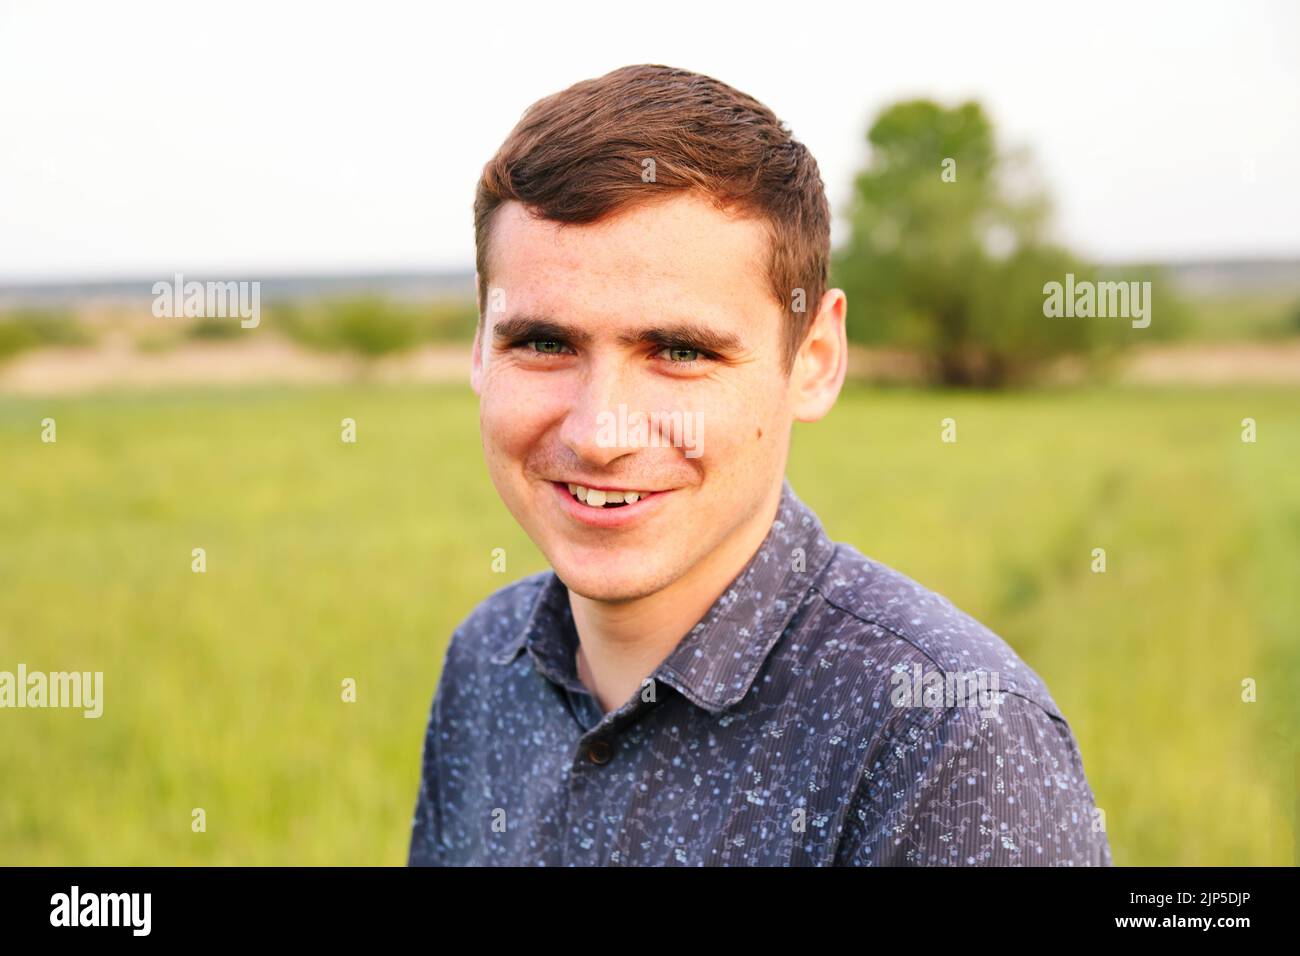 Defocus portrait young man on nature summer background. Smiling young man. 20s years. Handsome man outdoors portrait. Walking in park. Lifestyle Stock Photo